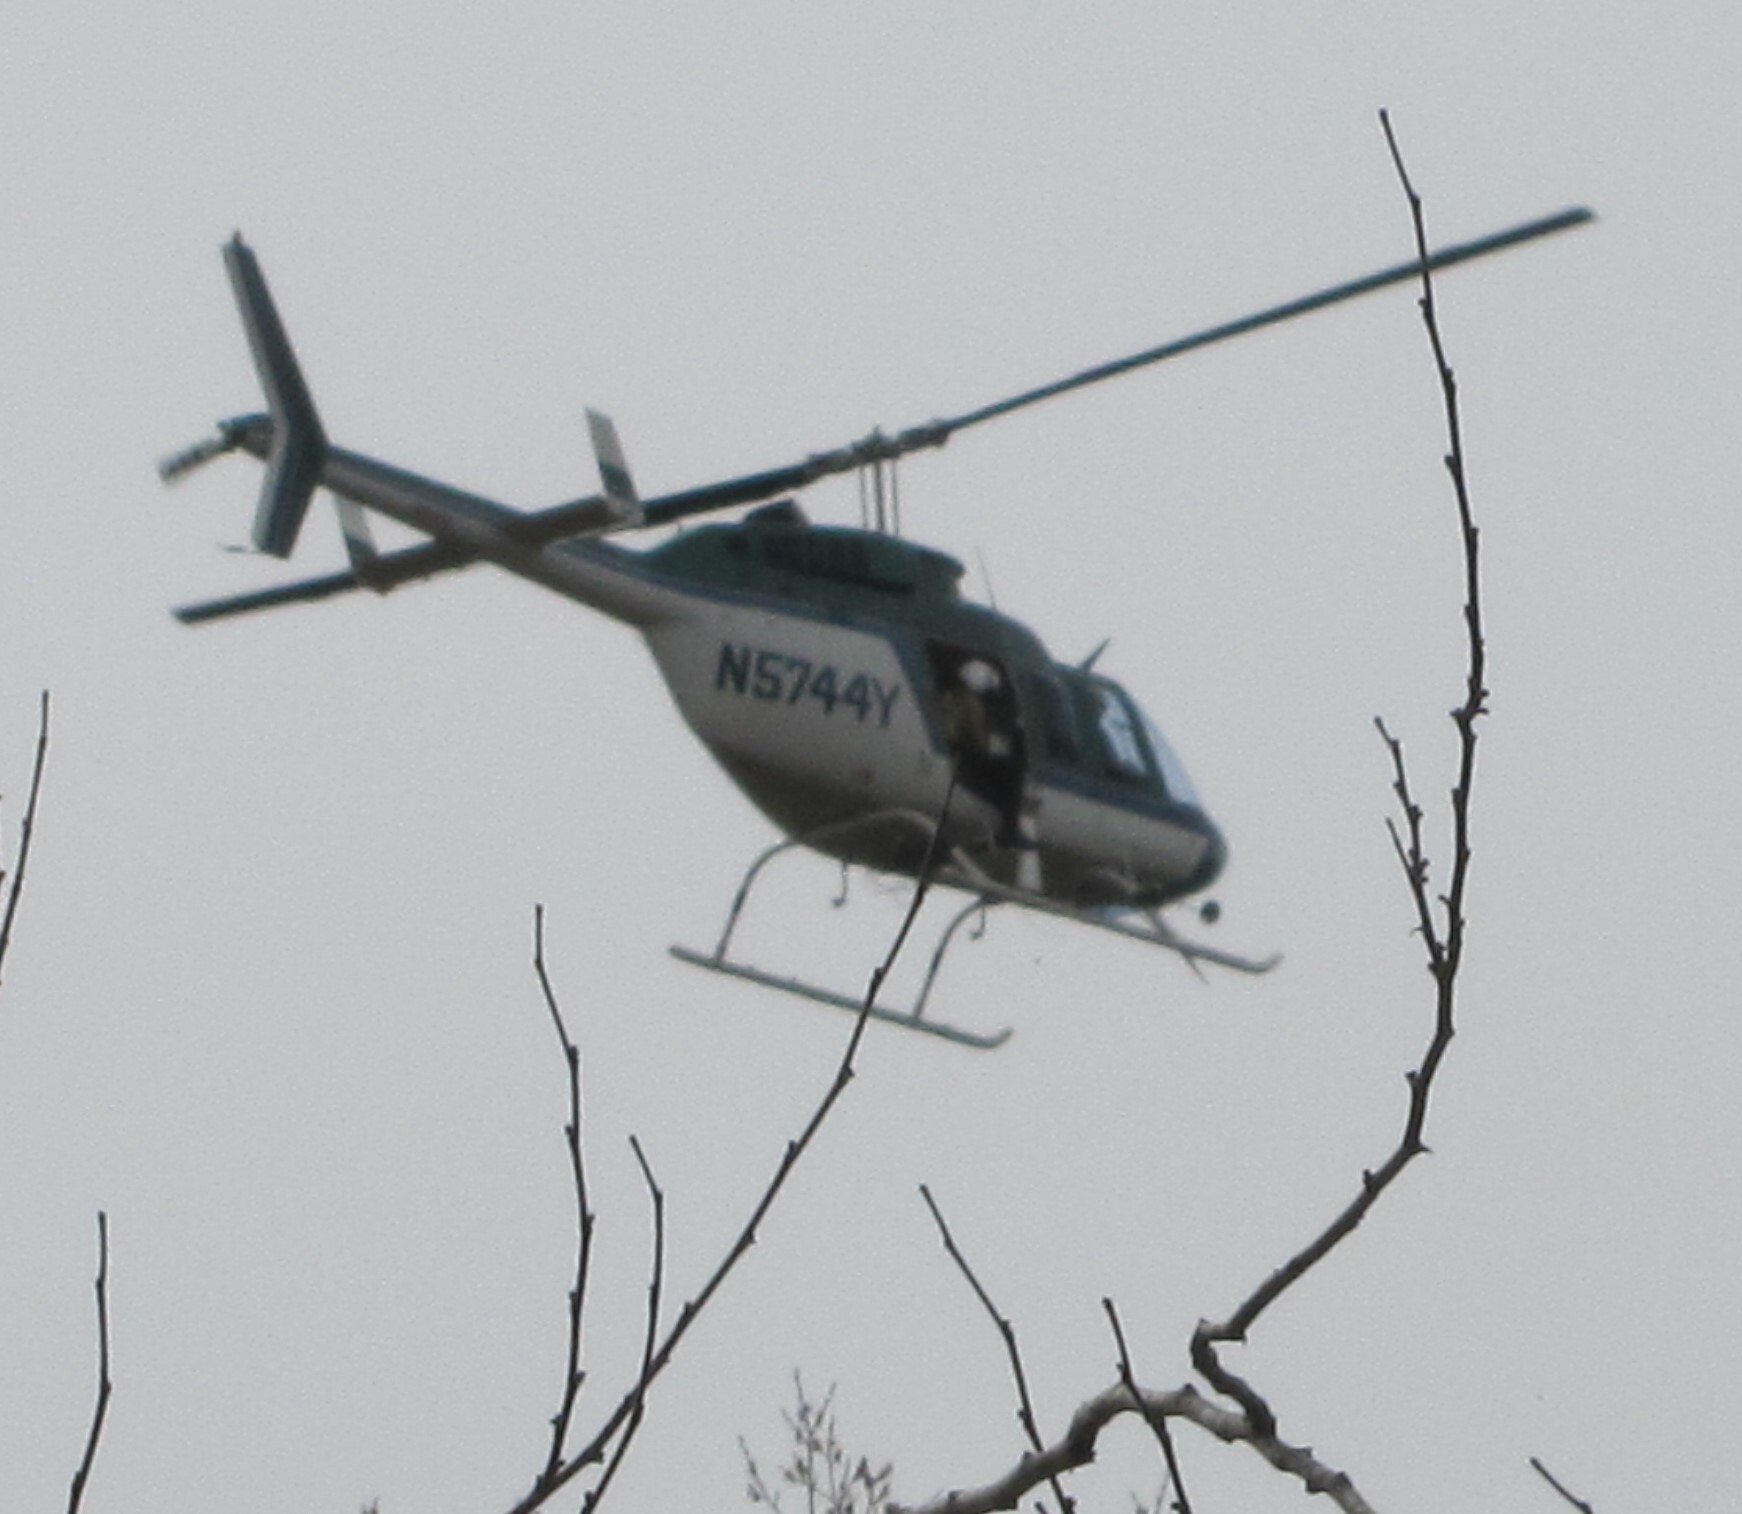 color photo of helicopter in flight against gray sky with a few tree branches at bottom and right.